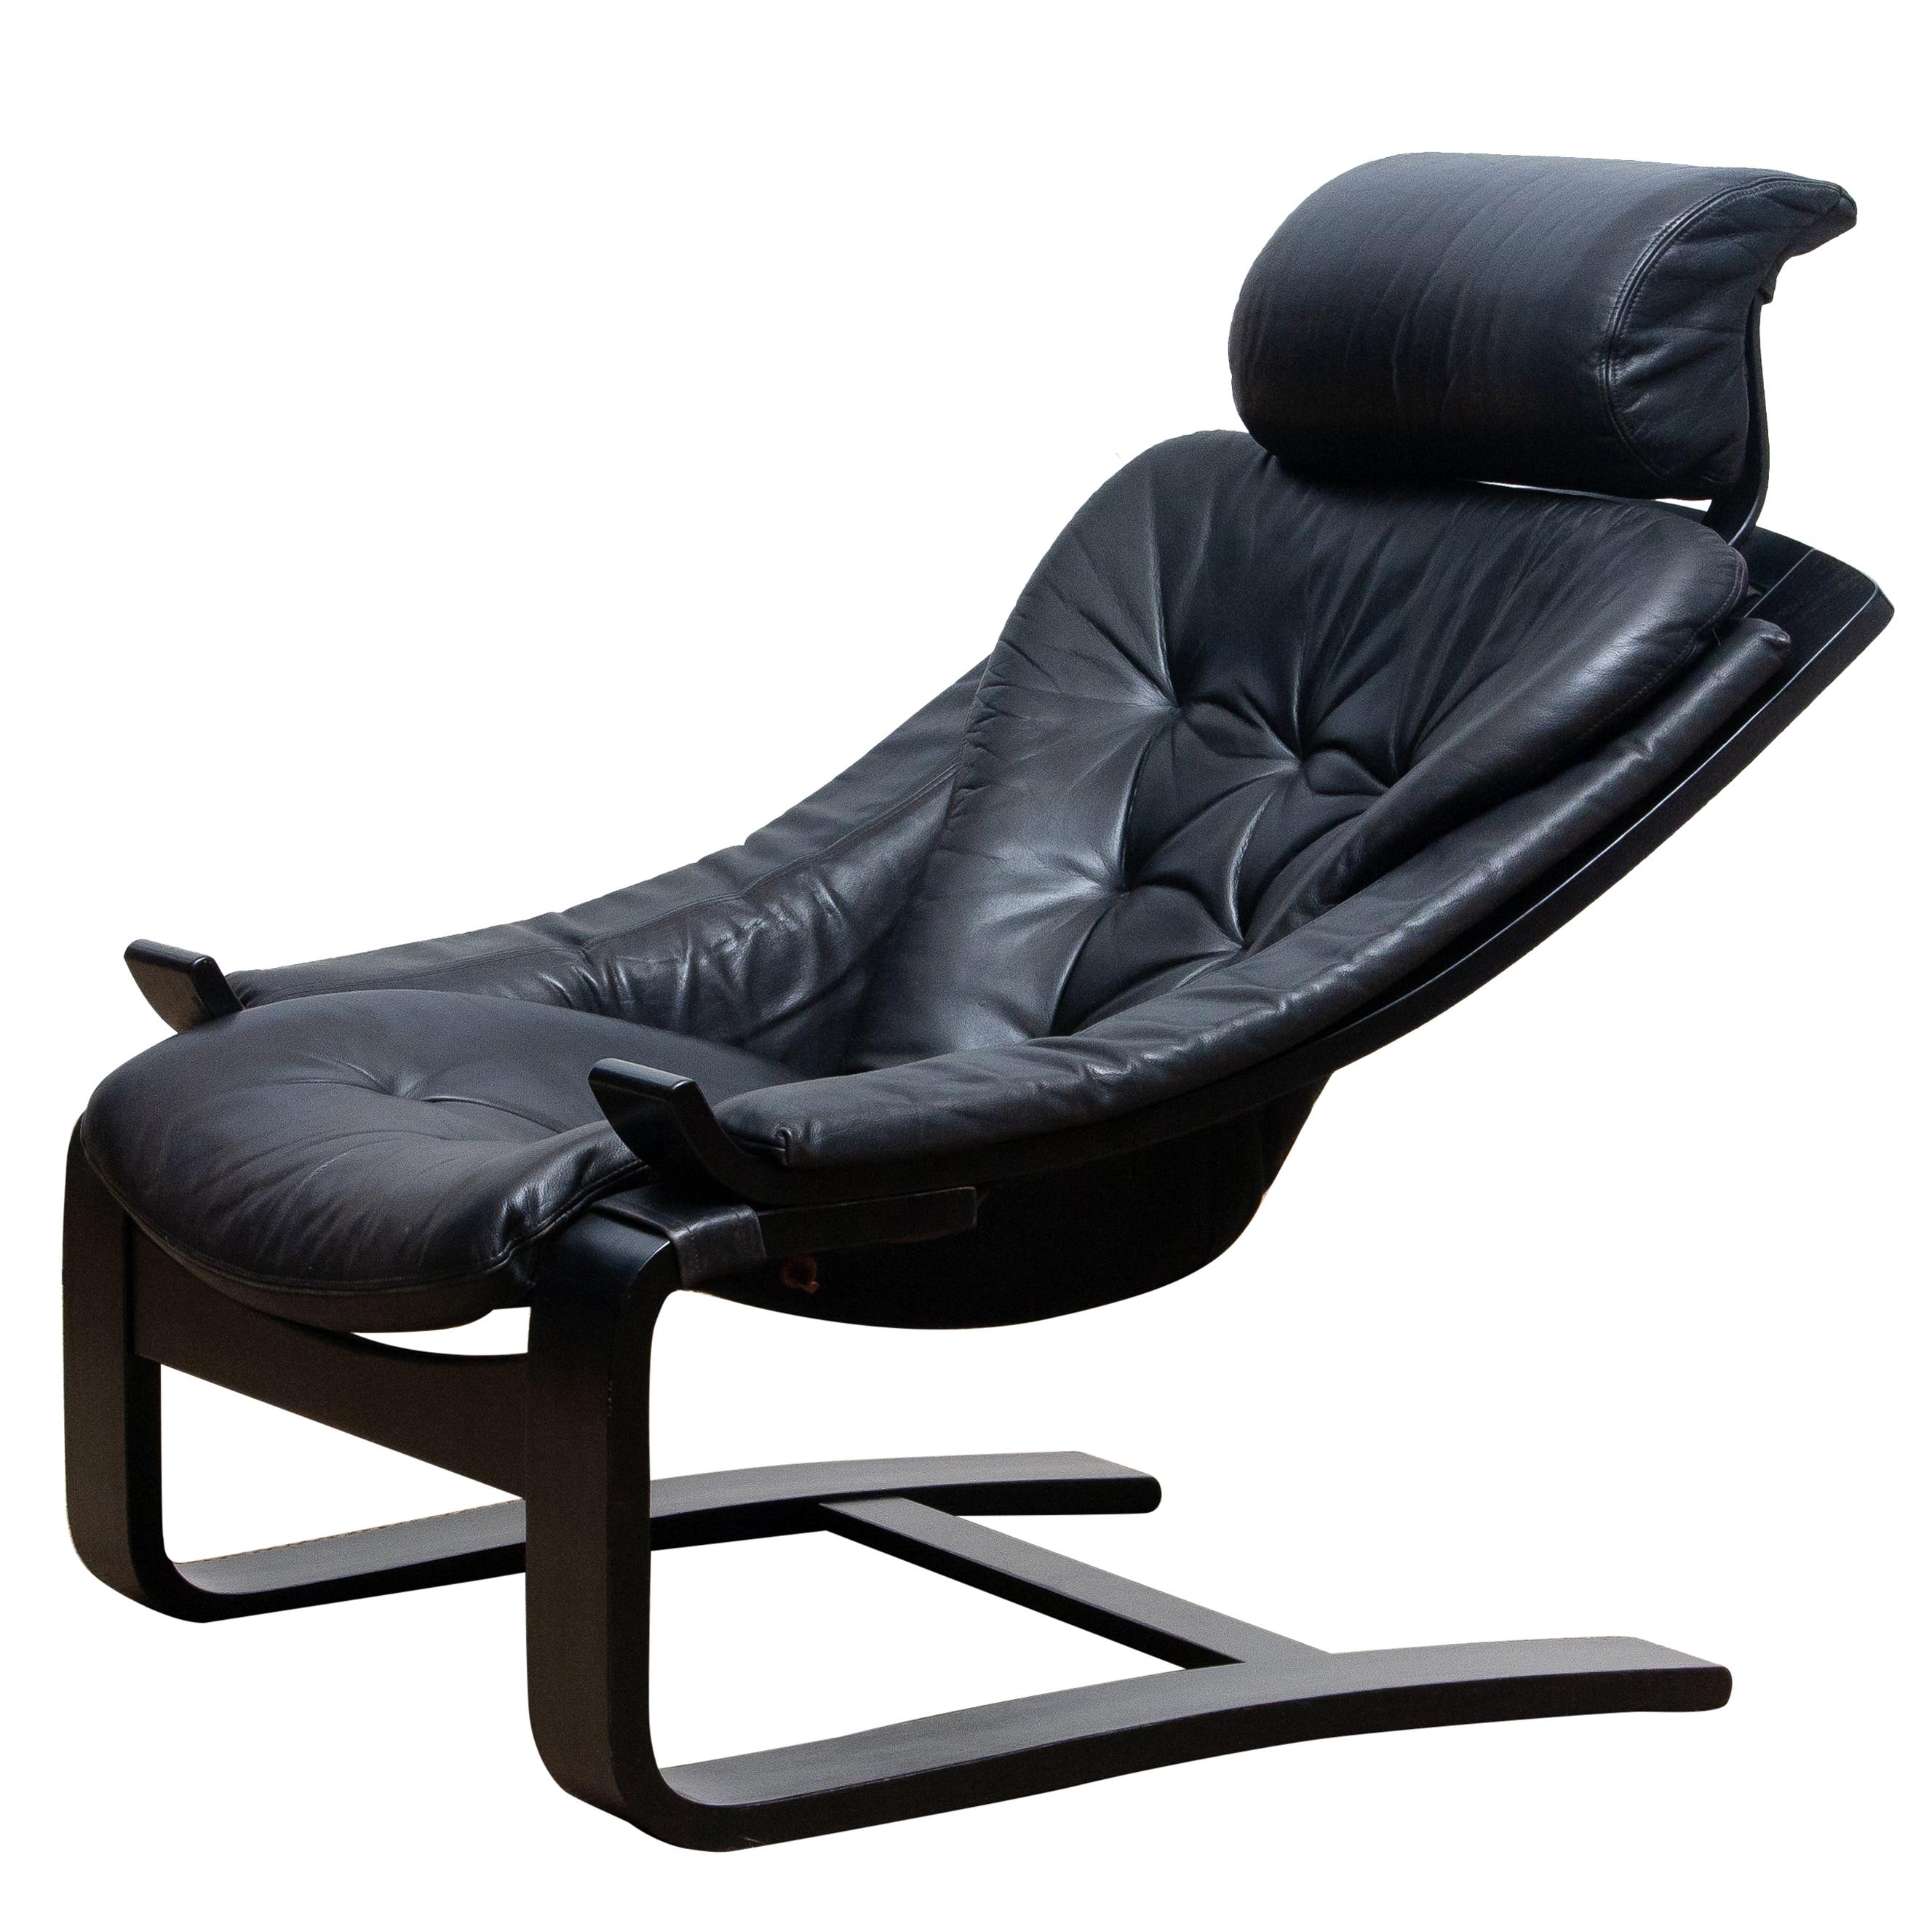 1970s, Black 'Kroken' Lounge Chair By Ake Fribytter for Nelo Sweden In Leather.